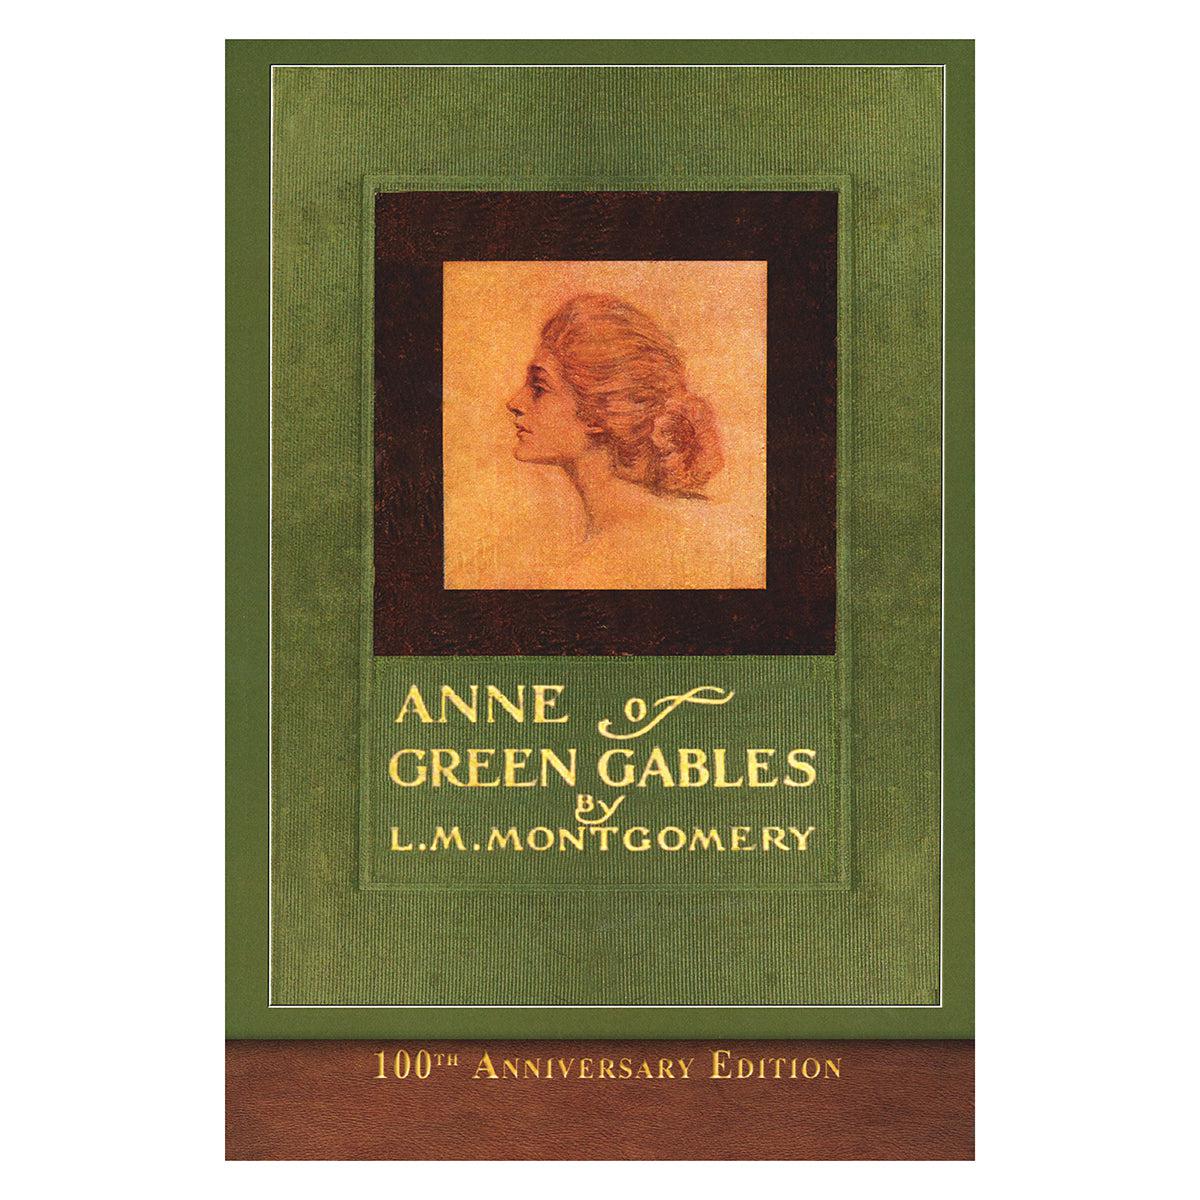 Anne of Green Gables Paperback Novel-100th Anniversary Edition